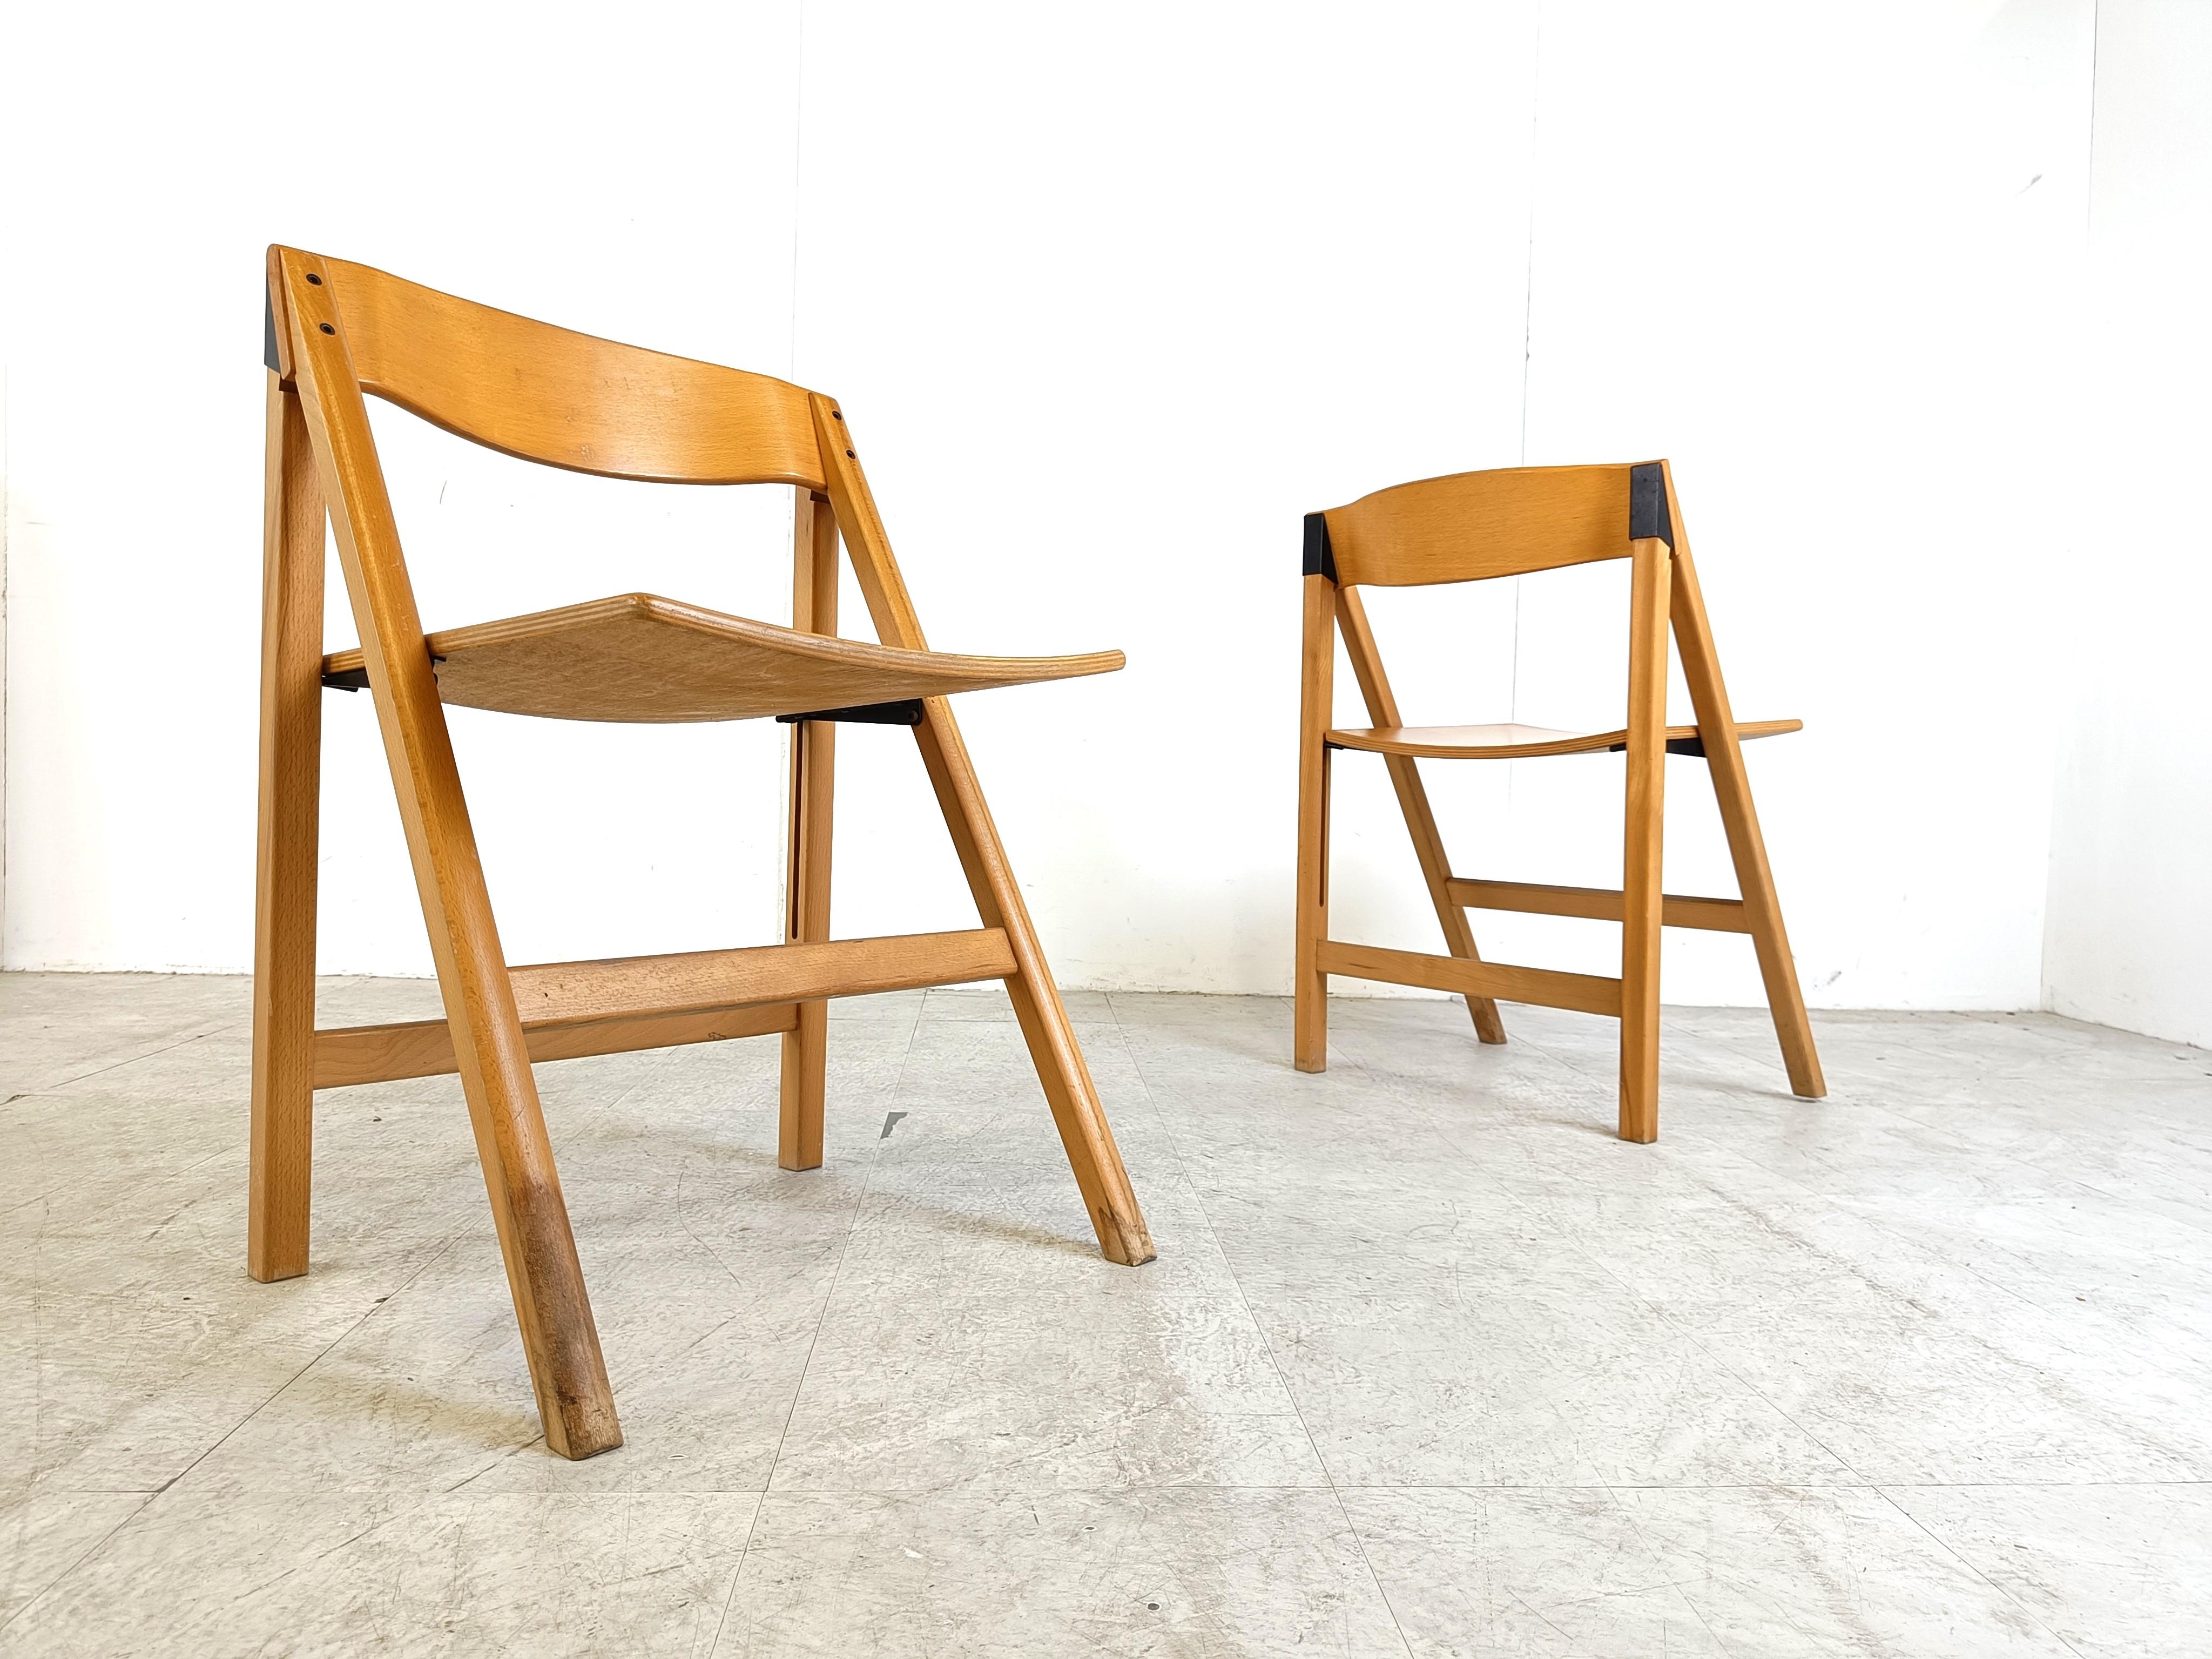 Vintage scandinavian folding chairs by Hyllinge Mobler, 1970s - set of 8 For Sale 2